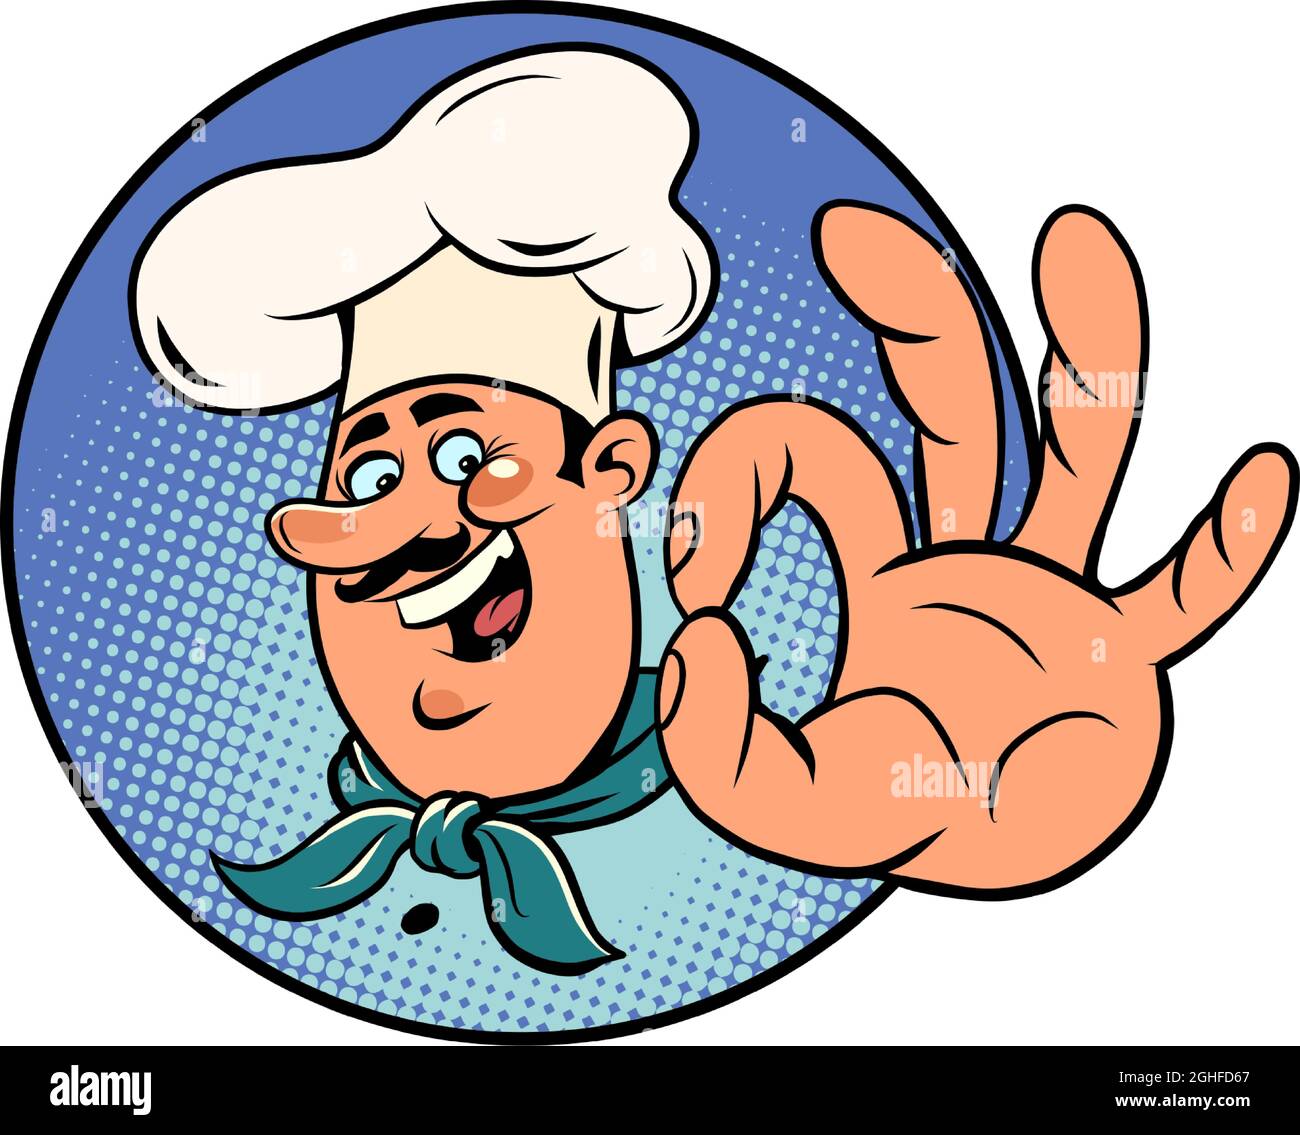 The cook makes an OK gesture. A good menu and the best cuisine poster Stock Vector